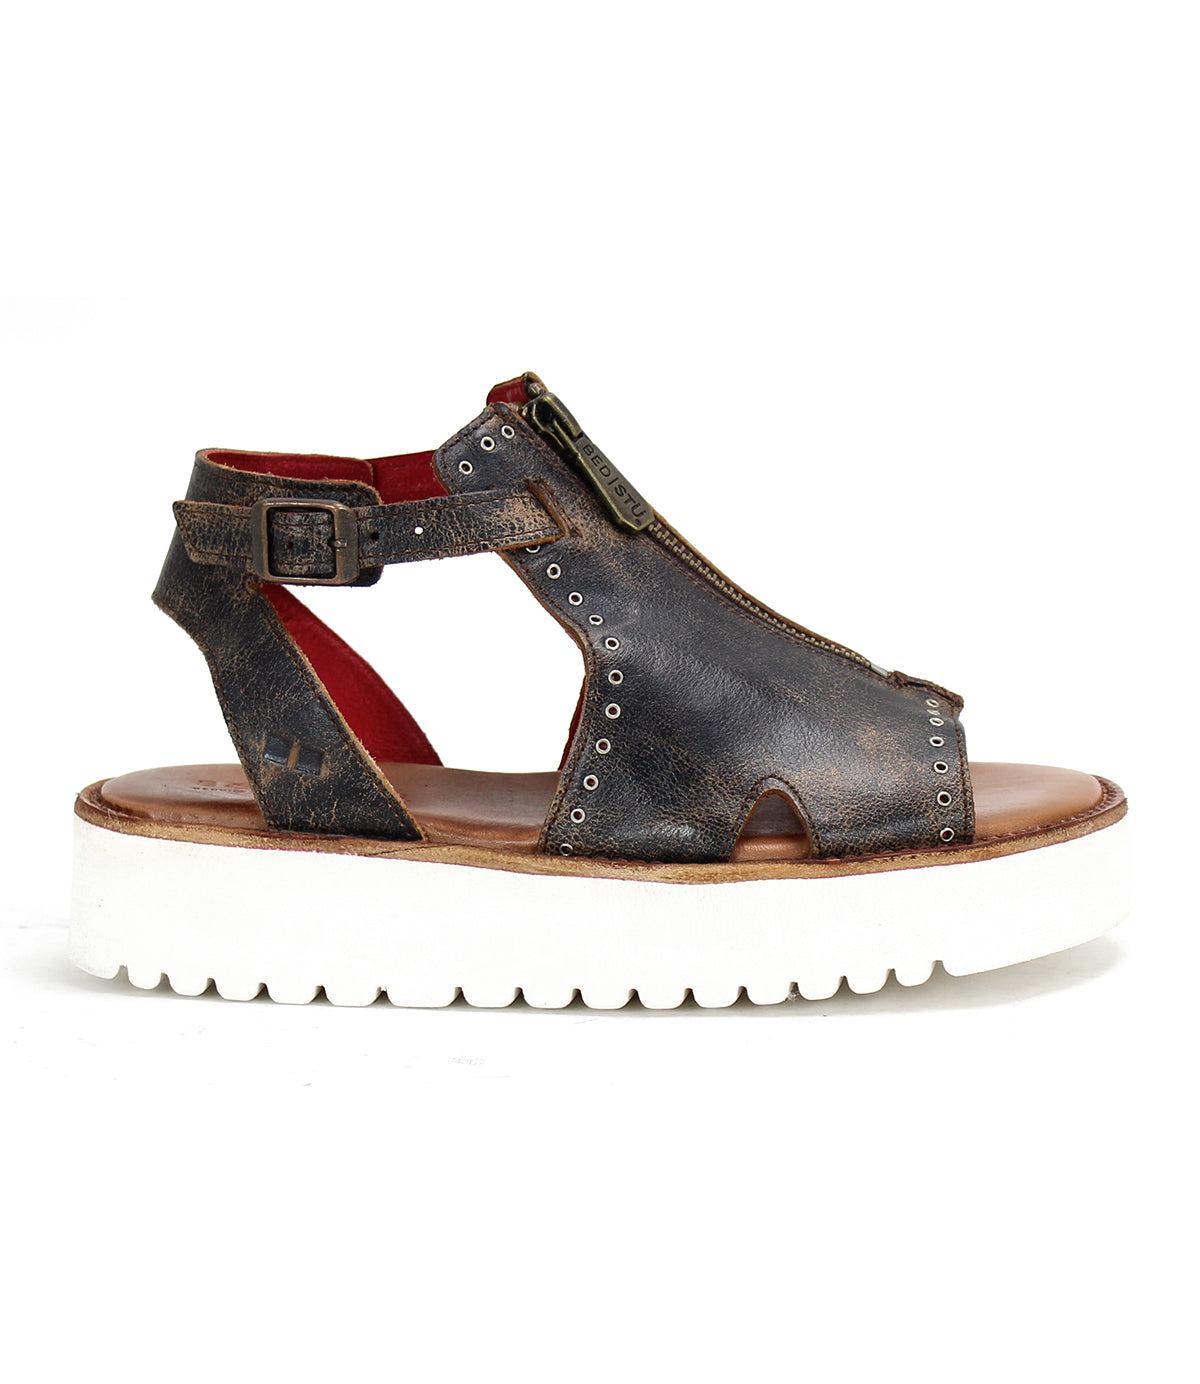 A women's brown leather sandal with a white XL EXTRALIGHT® sole named Clancy by Bed Stu.